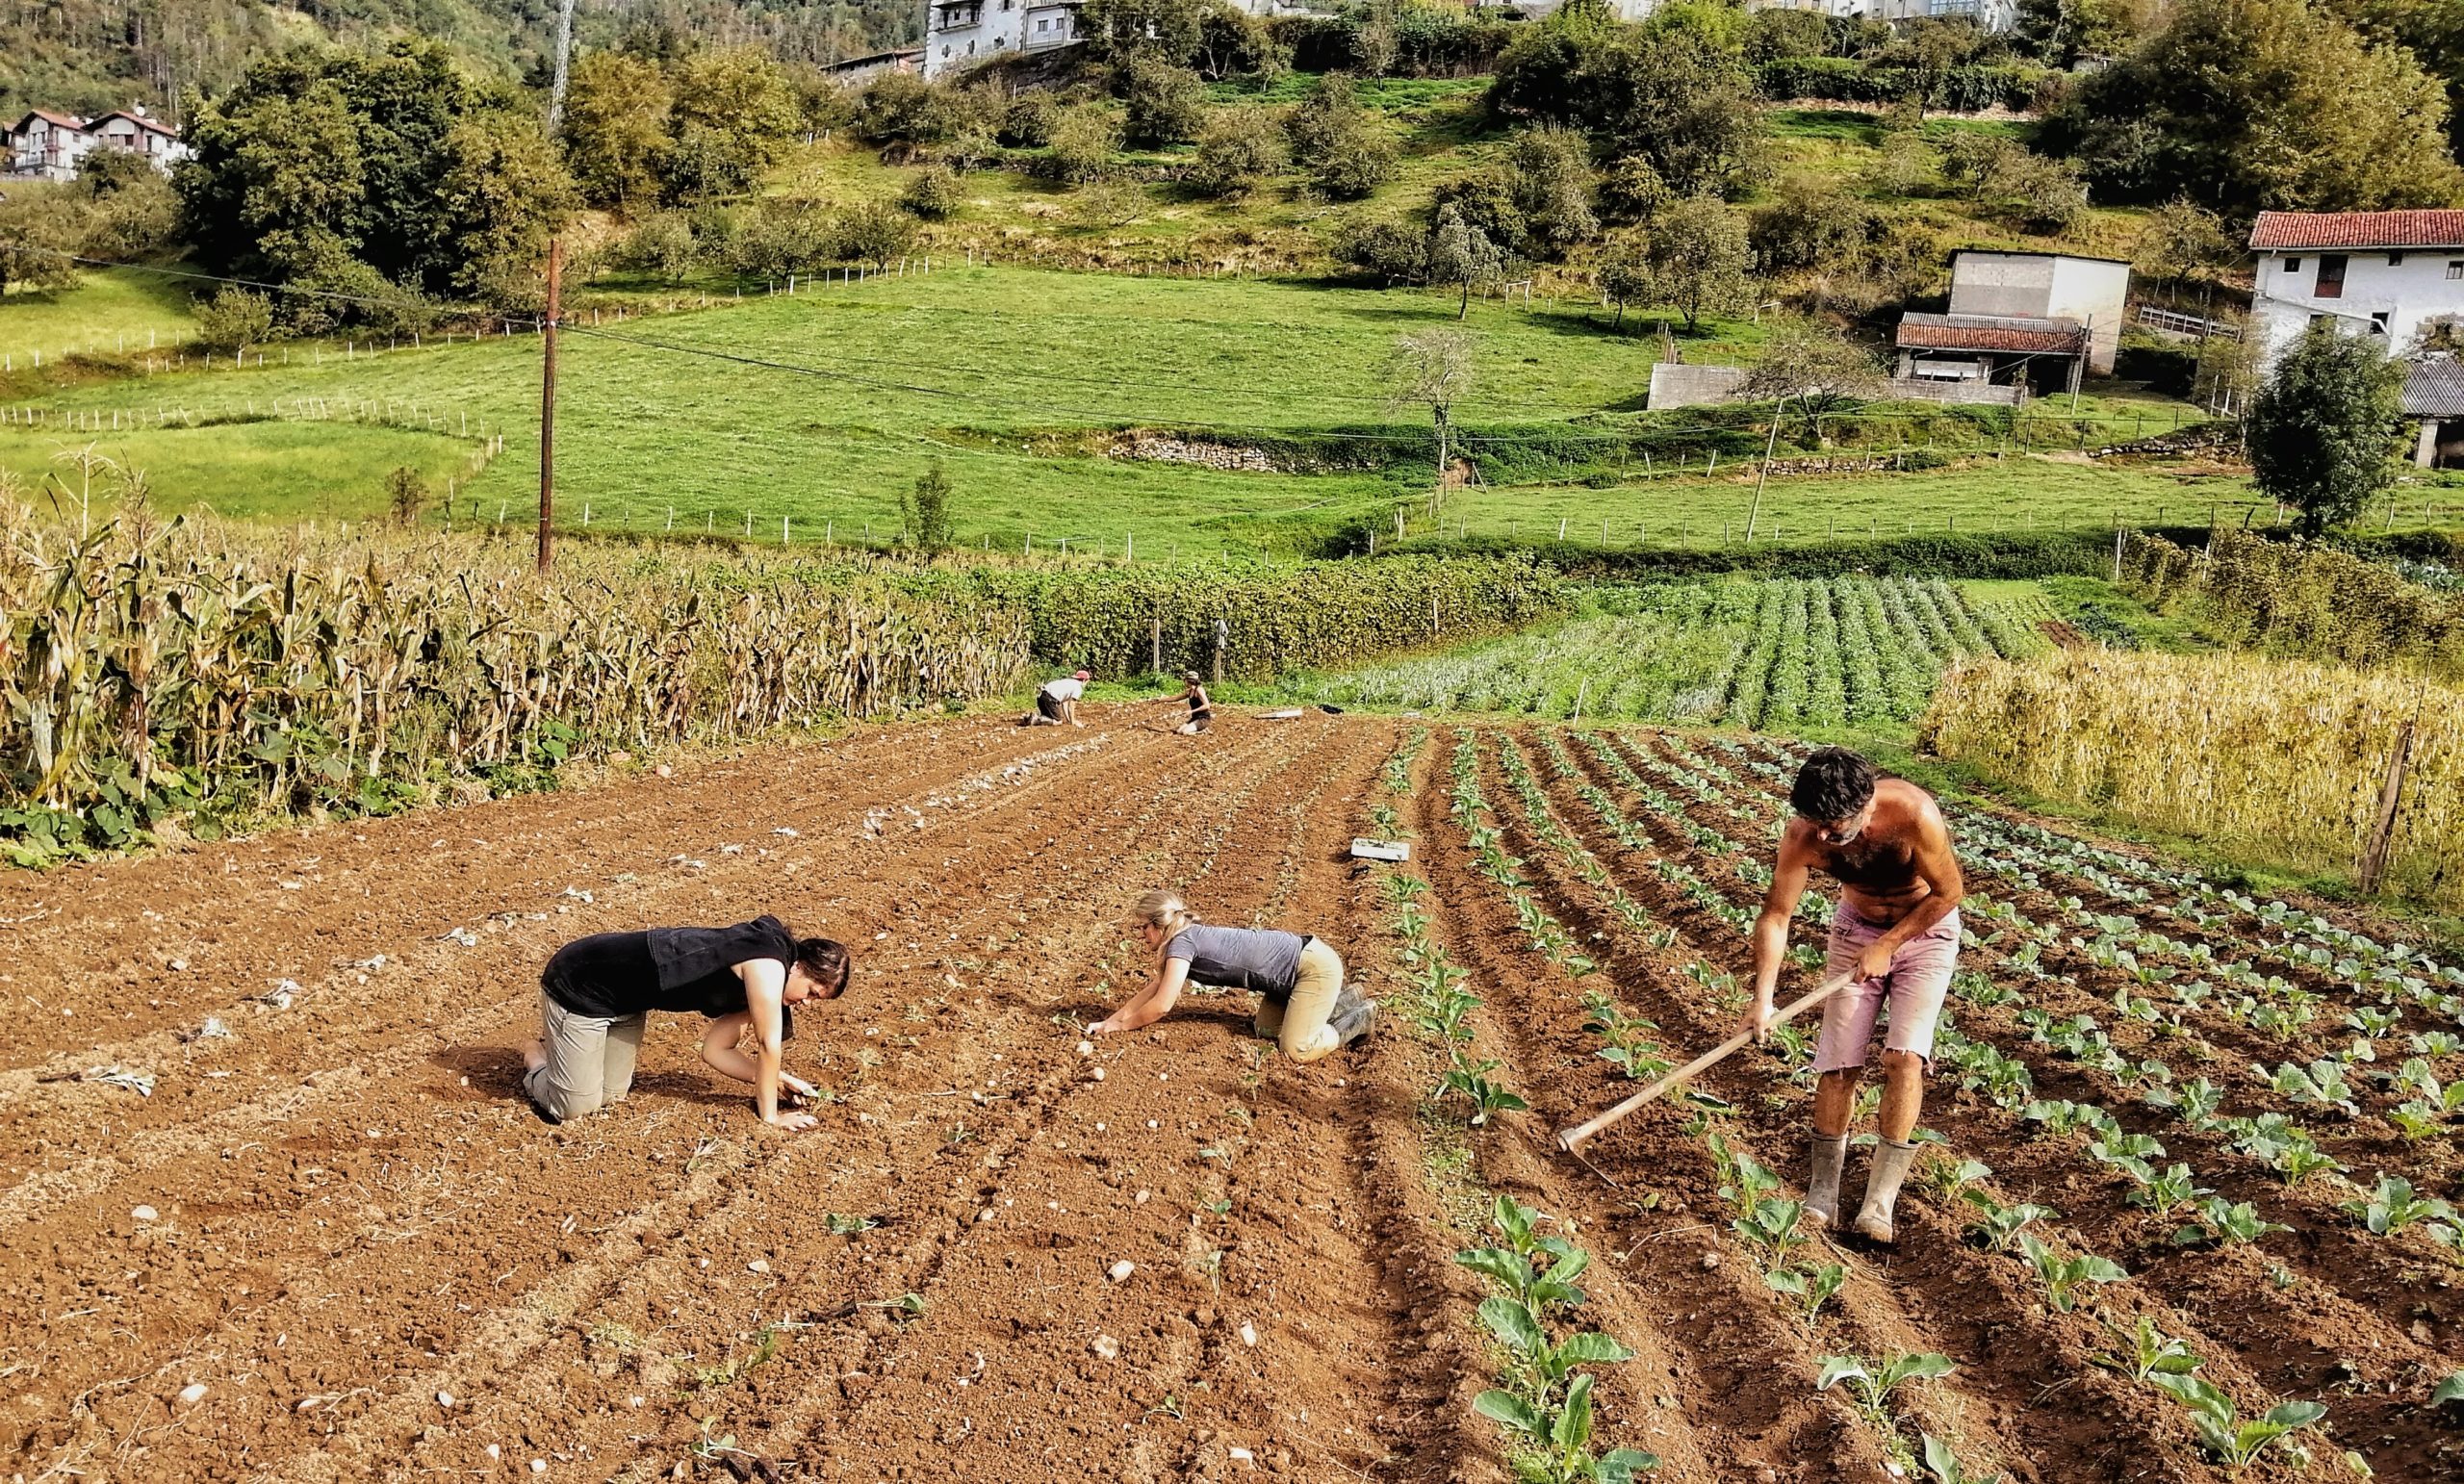 Farm labourers in a field, planting seedlings and preparing the soil. The field is surrounded by rows of corn plants and in the background is a hillside dotted with a houses.